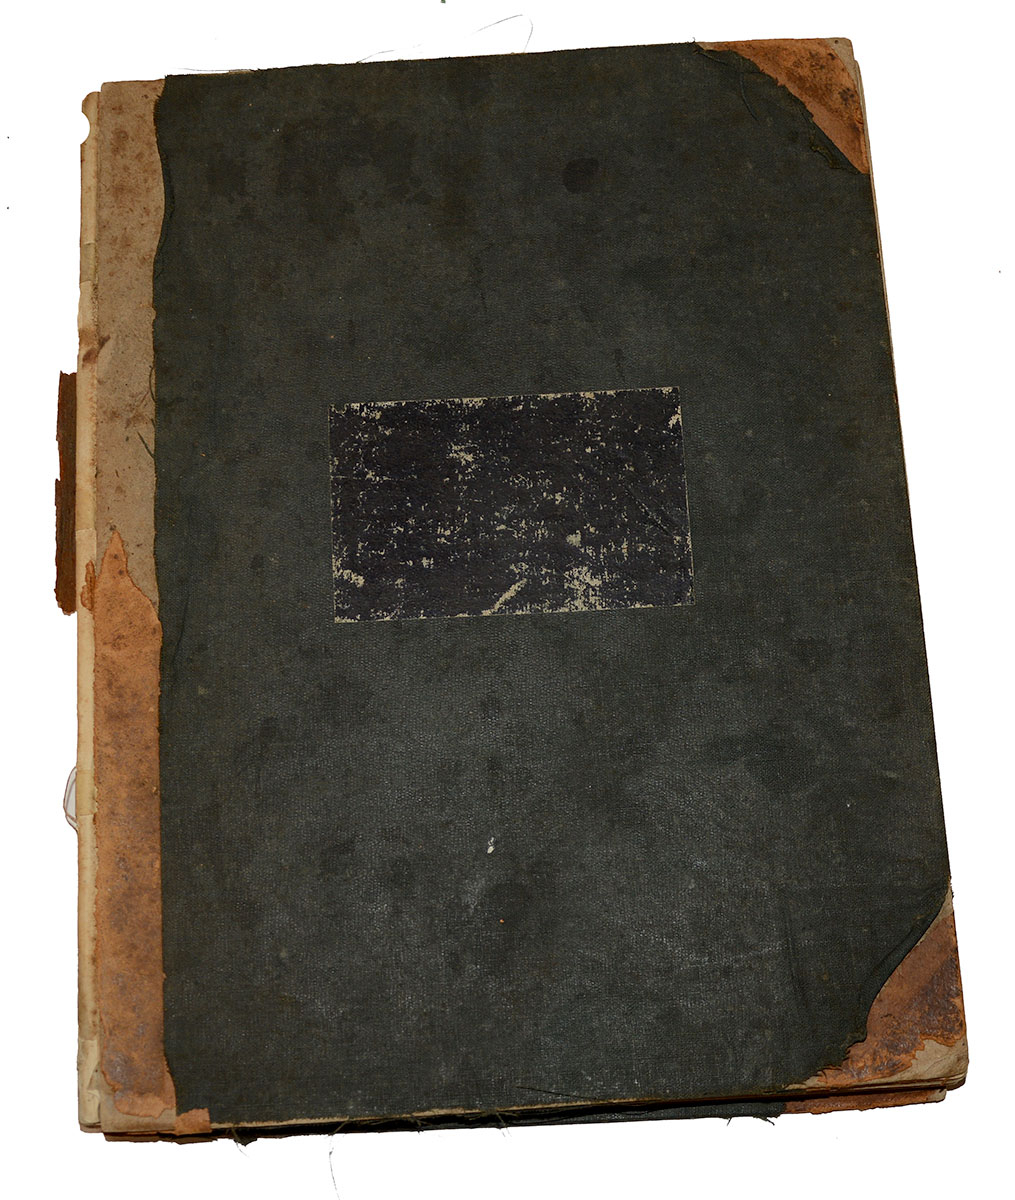 CONFEDERATE CLOTHING ACCOUNT BOOK FOR THE COLUMBUS LIGHT ARTILLERY: CAPT. CROFT’S FLYING ARTILLERY BATTERY